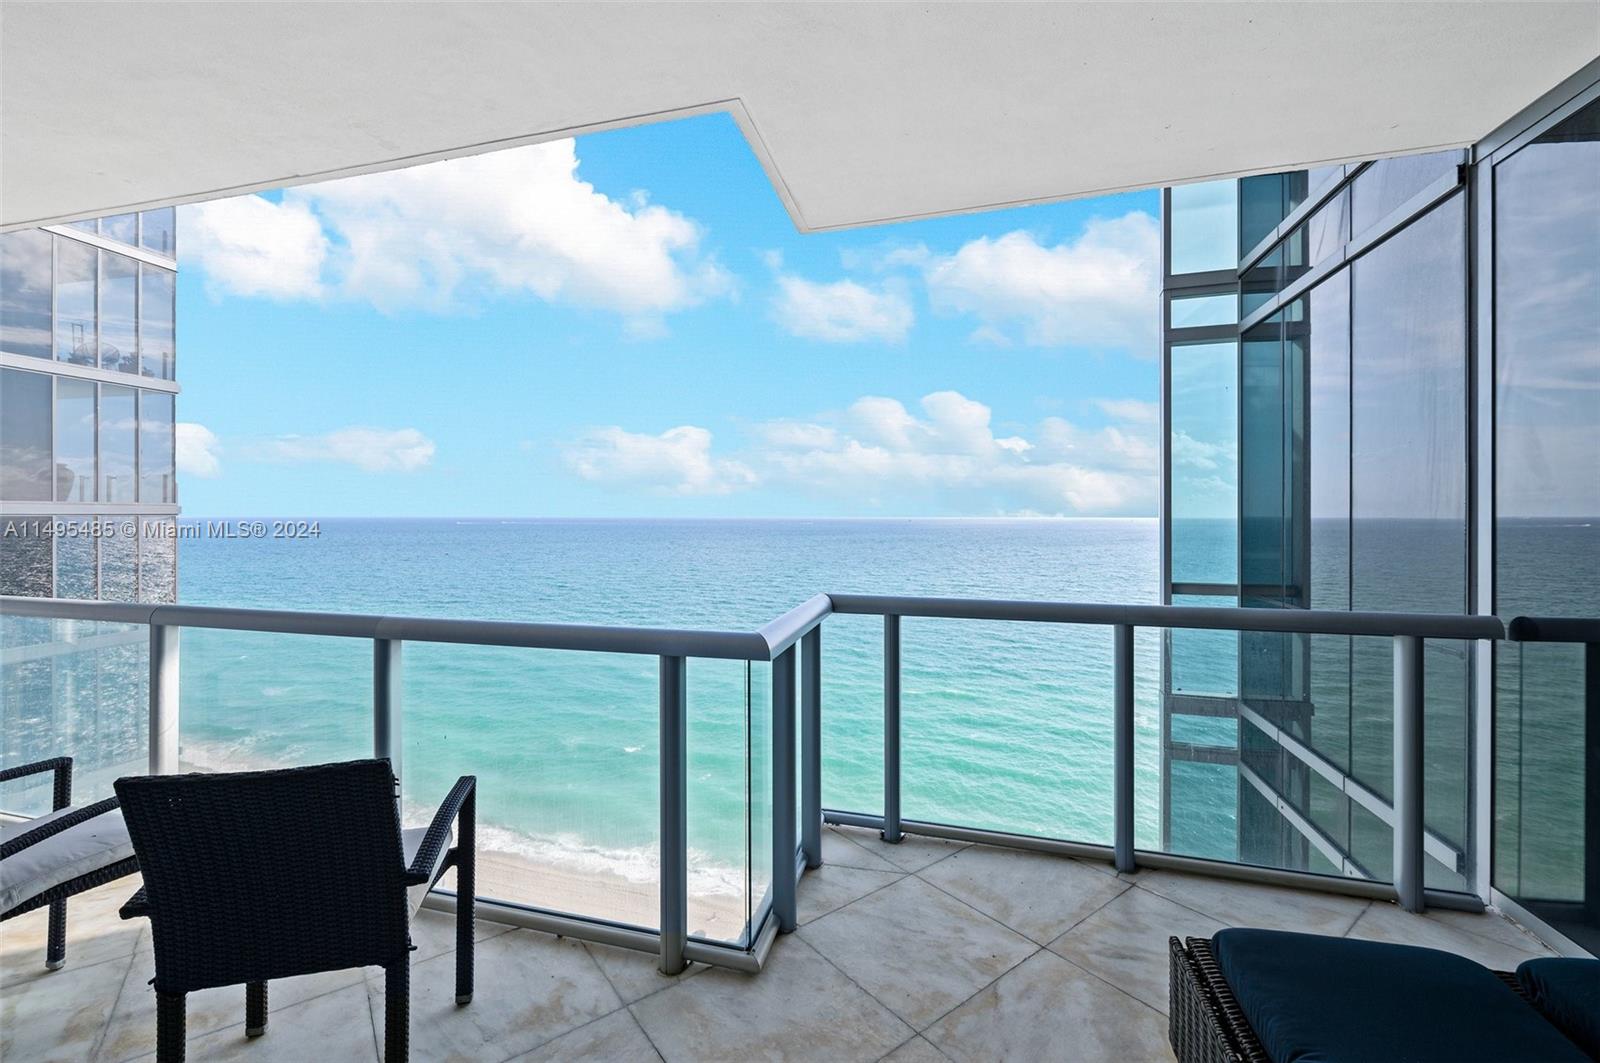 Discover coastal luxury at its zenith in Jade Ocean in this corner residence with floor-to-ceiling windows on three sides, offering breathtaking direct ocean and city views. This furnished 3-bed, 3 ½-bath haven is move-in ready, flooded with natural light for you to relish the splendid sunrise and sunset in Sunny Isles Beach.  Your private elevator opens directly to the unit, revealing top-of-the-line appliances, a washer/dryer, modern bathrooms, and a spacious cooking island. Immerse yourself in resort-style amenities, including a spa, fitness center, business center, kids playroom, two pools, a cinema room, and full beach service.  Embrace the chance to immerse yourself in coastal living with unrivaled comforts—an invitation to a lifestyle beyond compare.